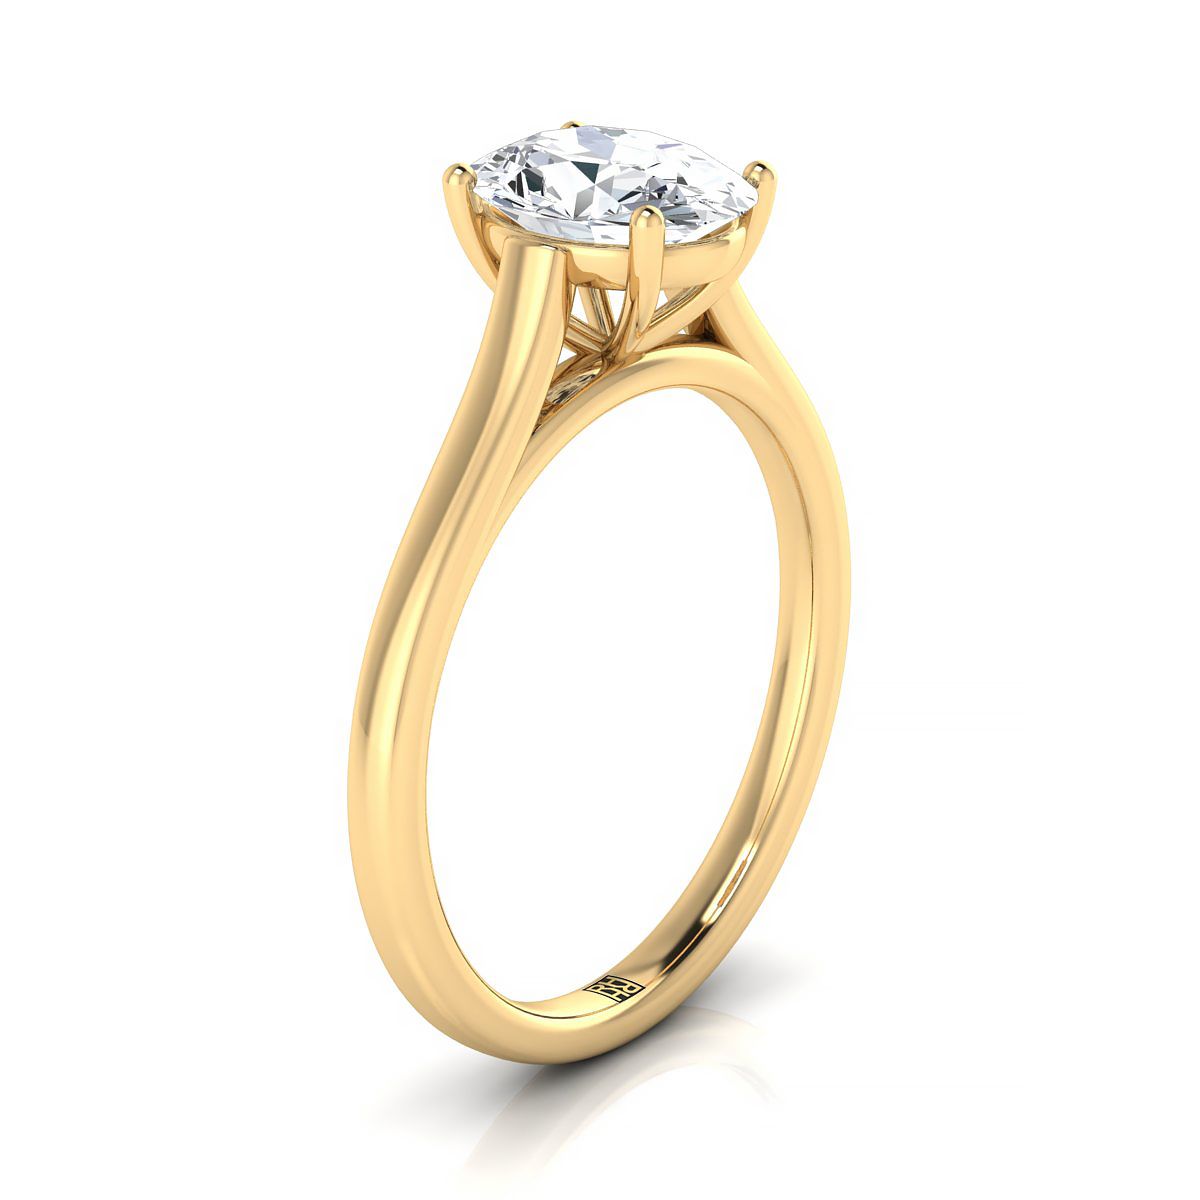 18K Yellow Gold Oval  Elegant Cathedral Solitaire Engagement Ring